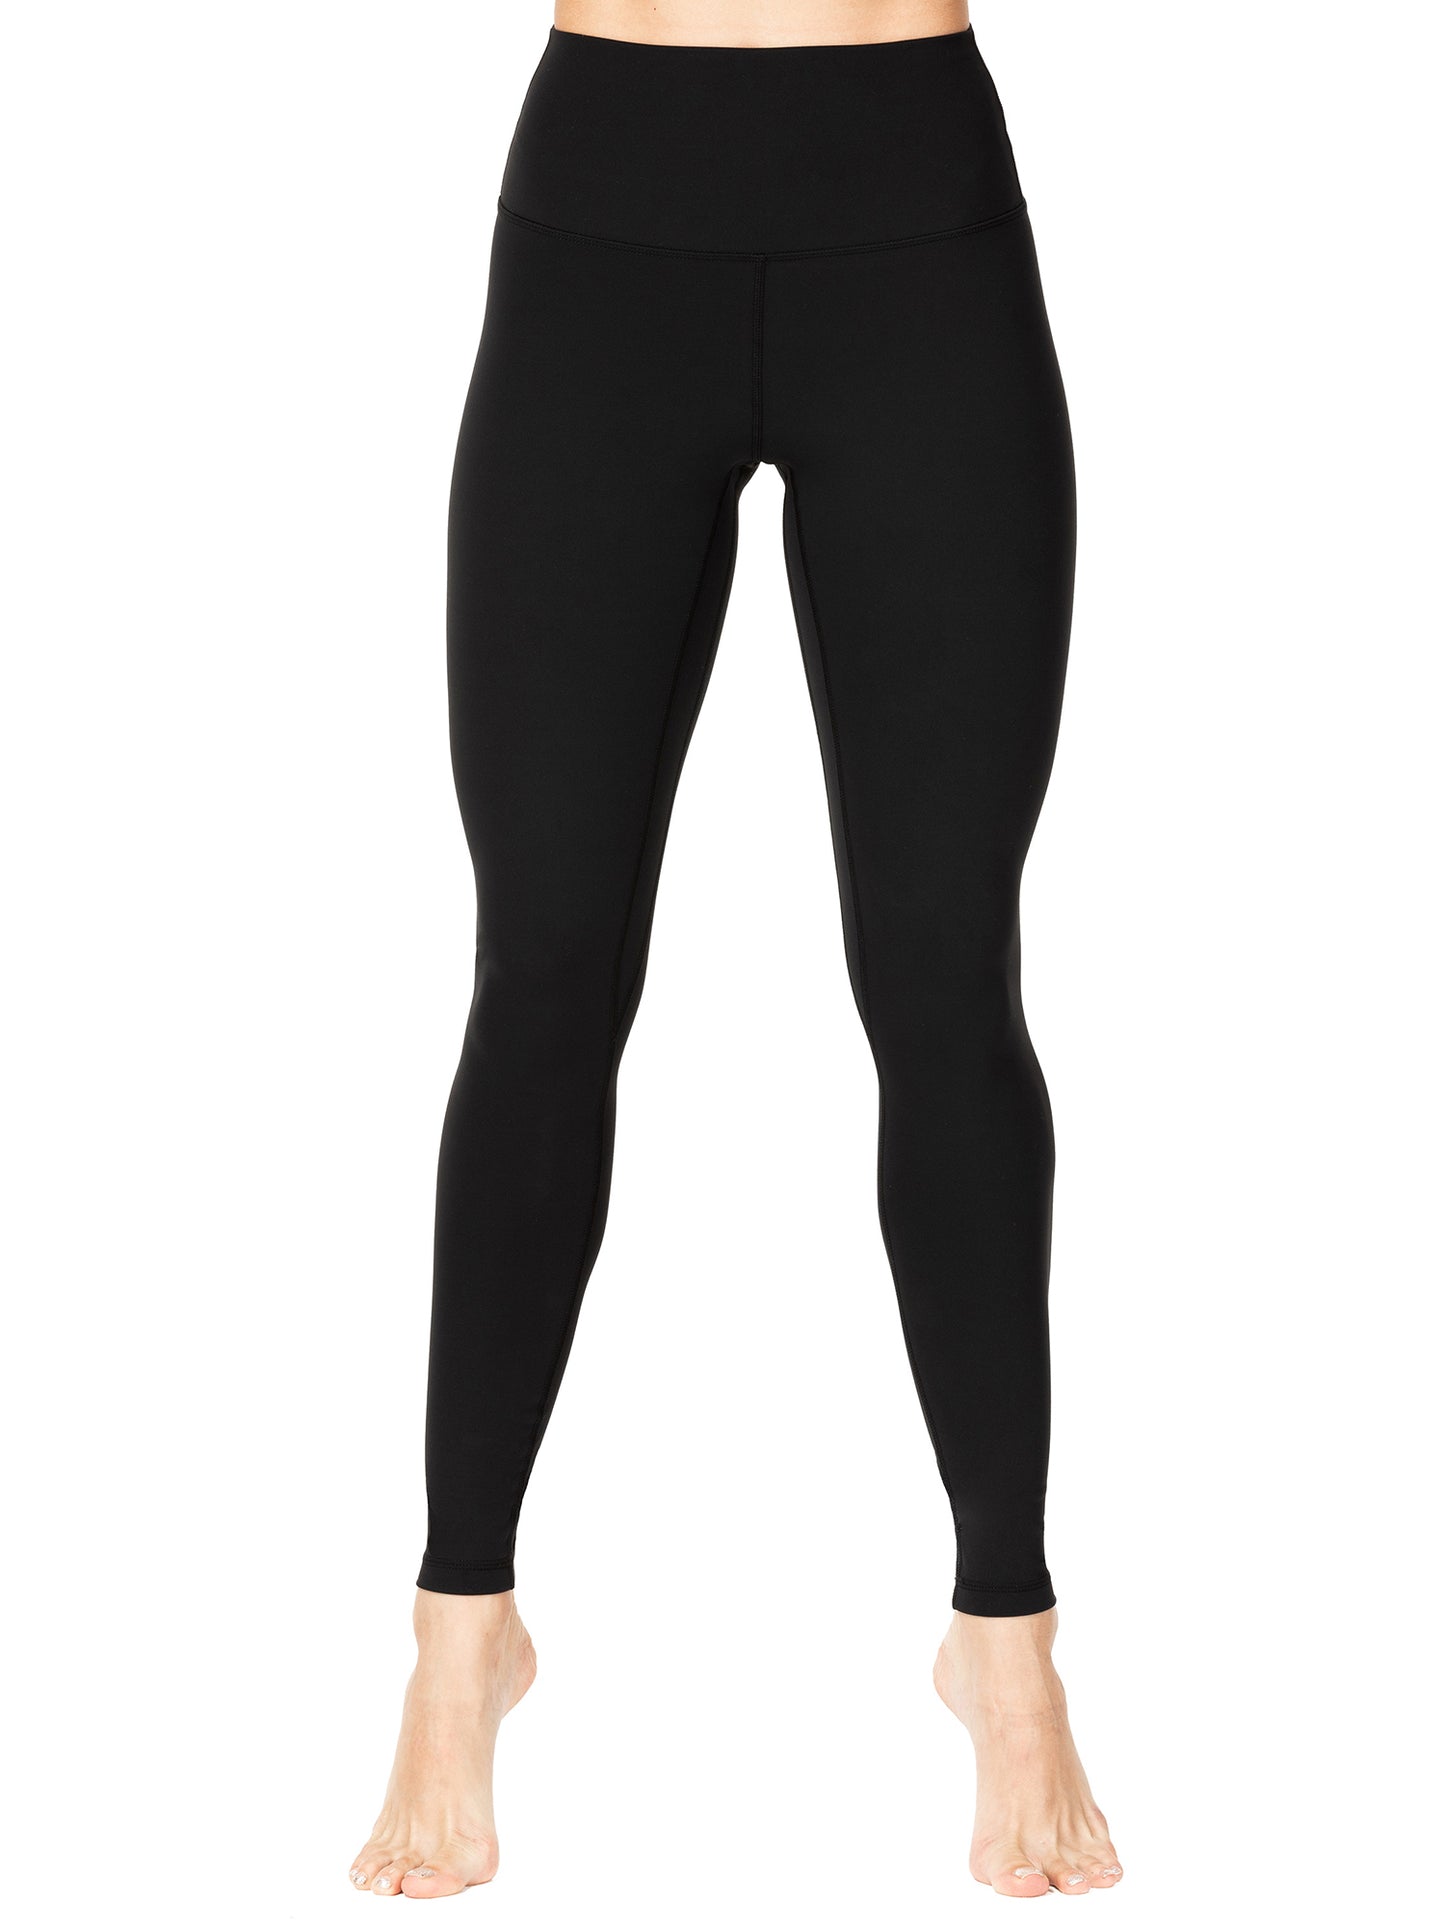 28" Workout Leggings High Waisted